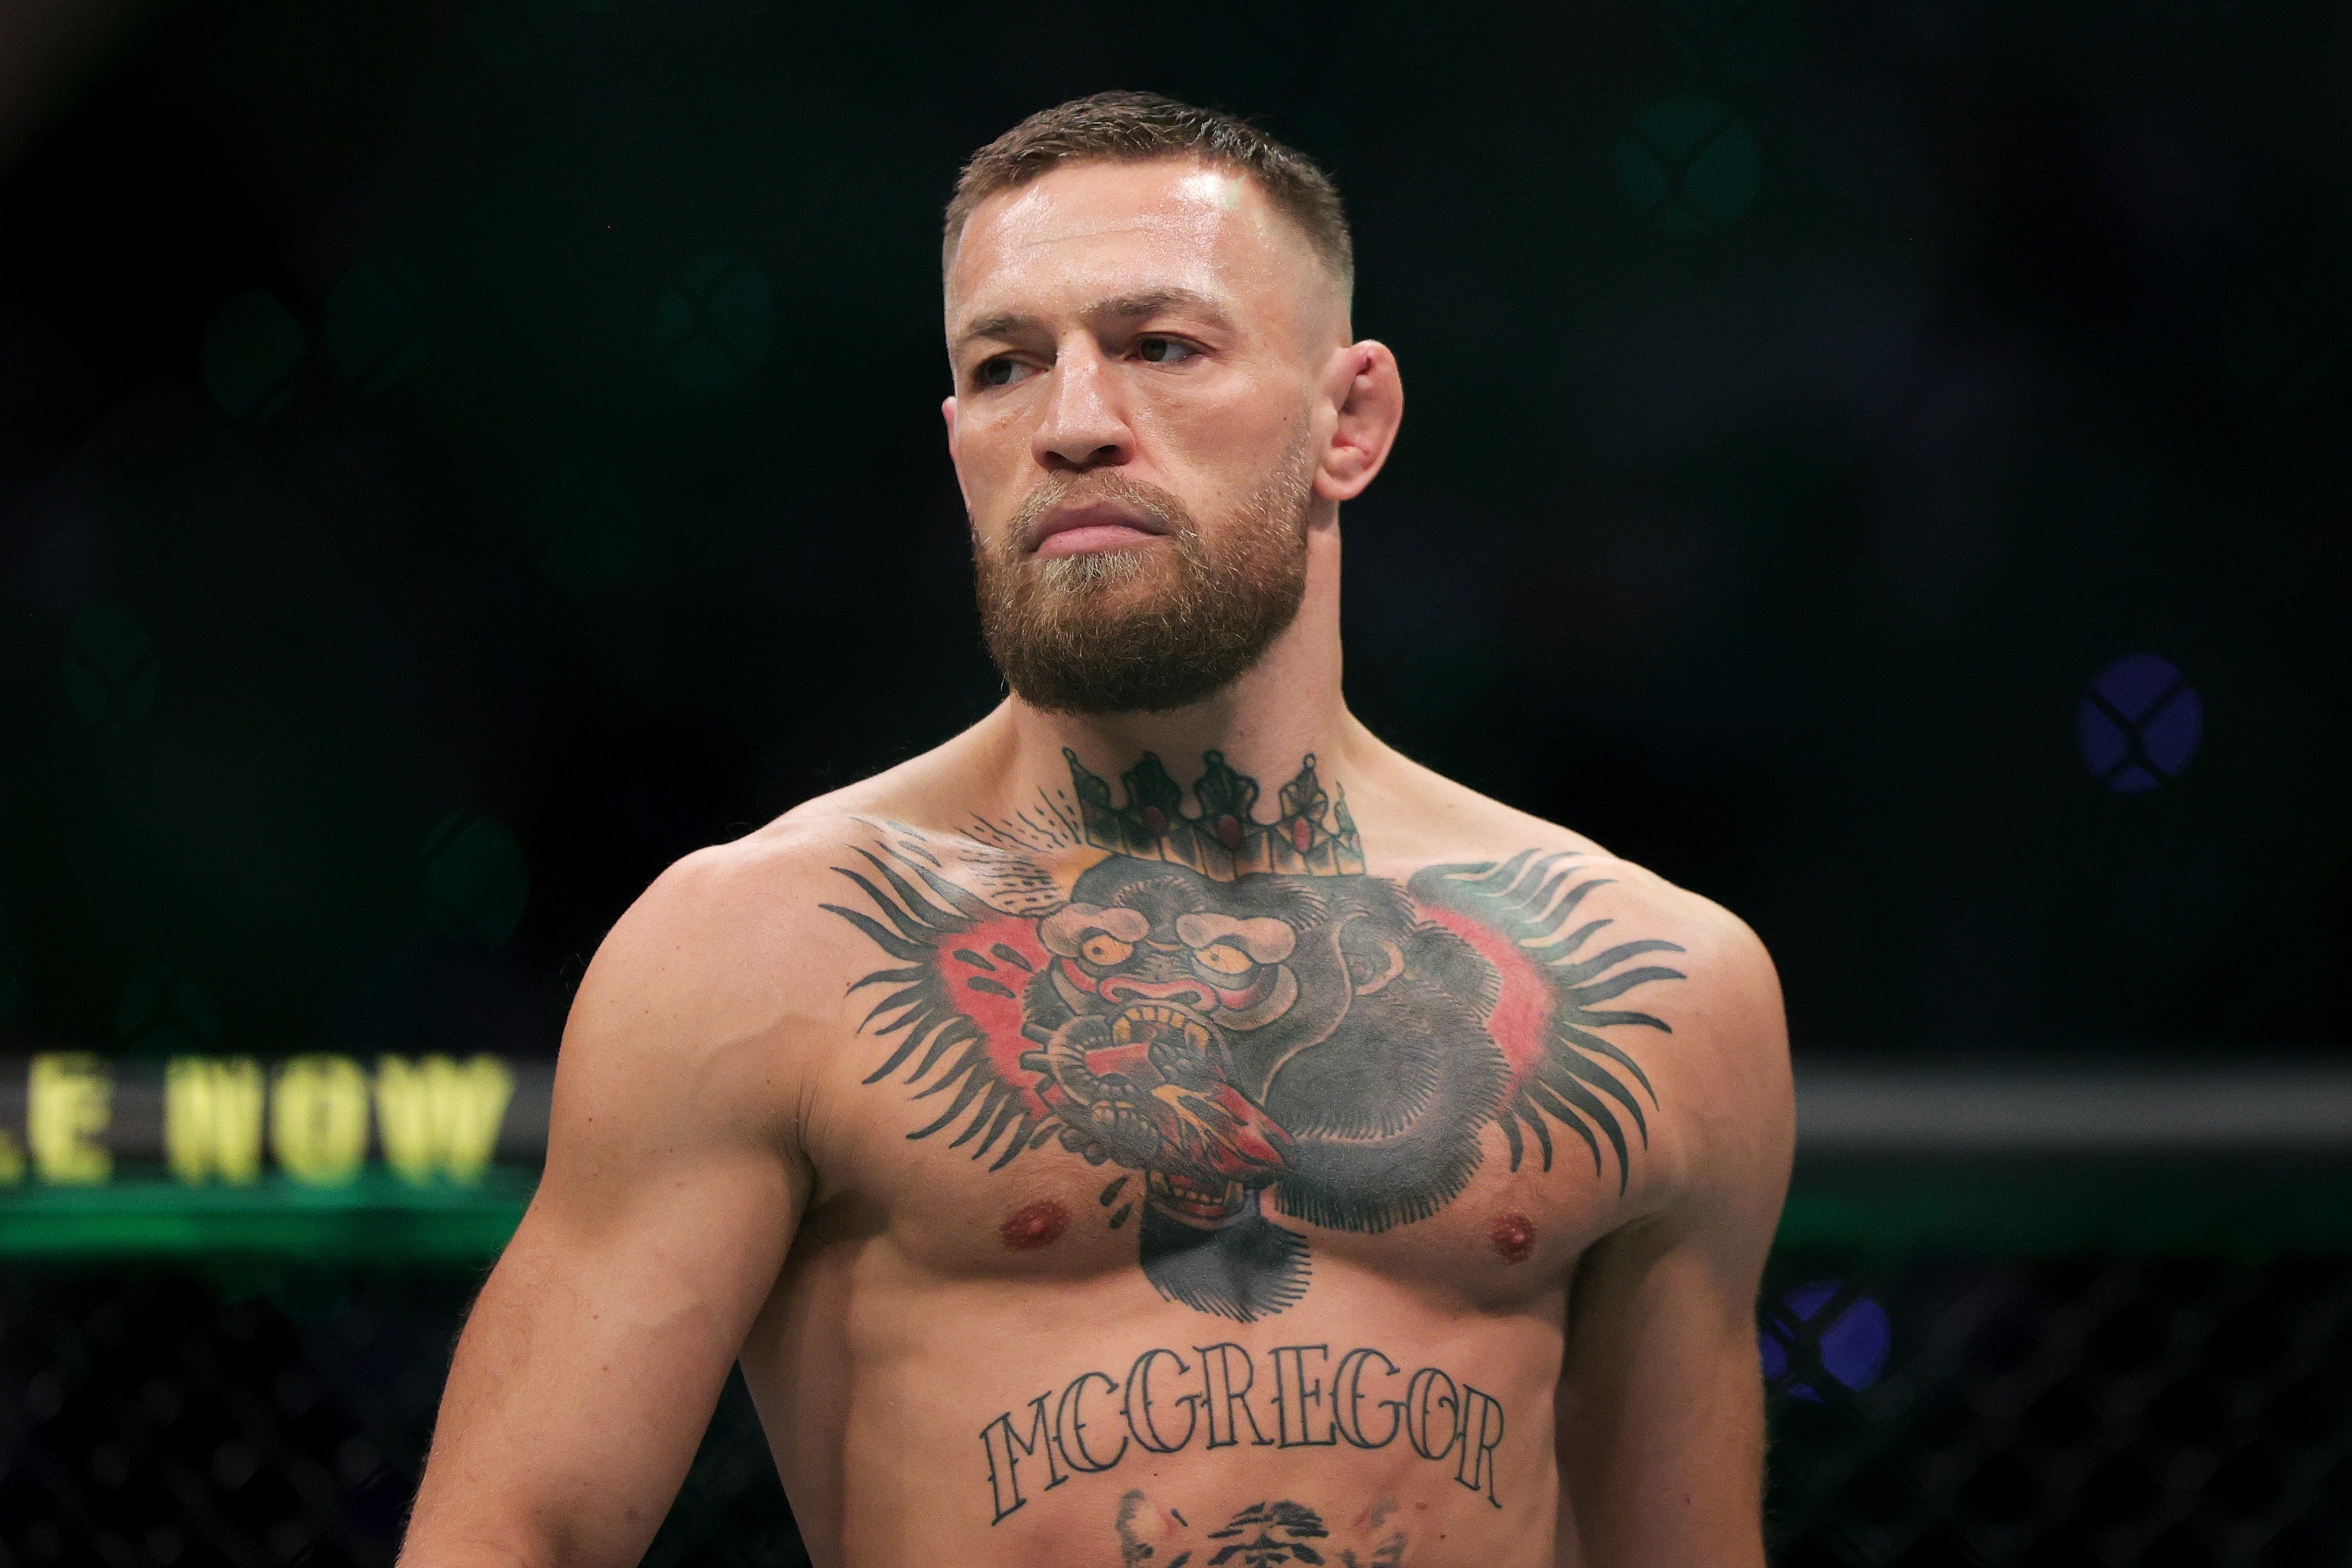 Conor McGregor has made his money through UFC and sponsorships